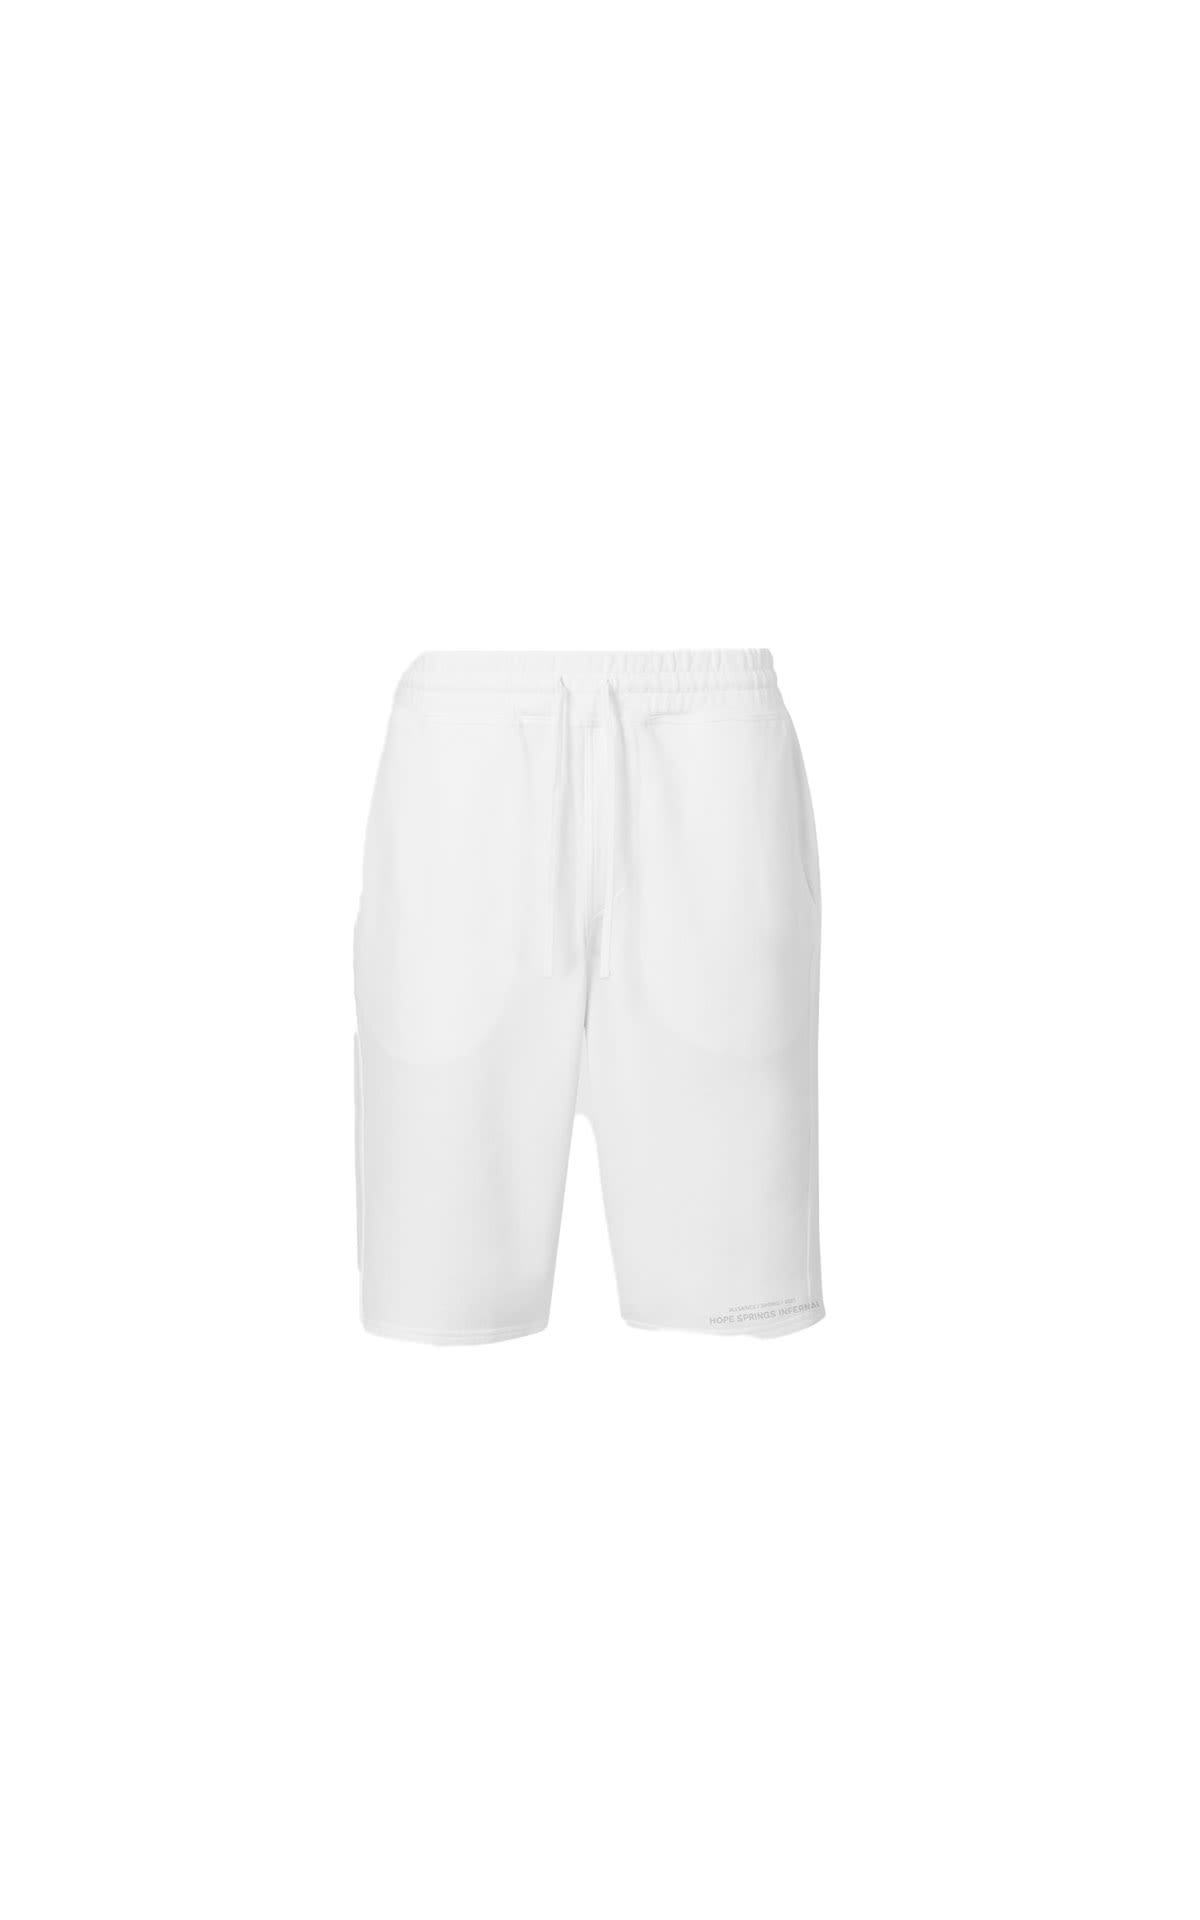 AllSaints Talie BF short optic white from Bicester Village